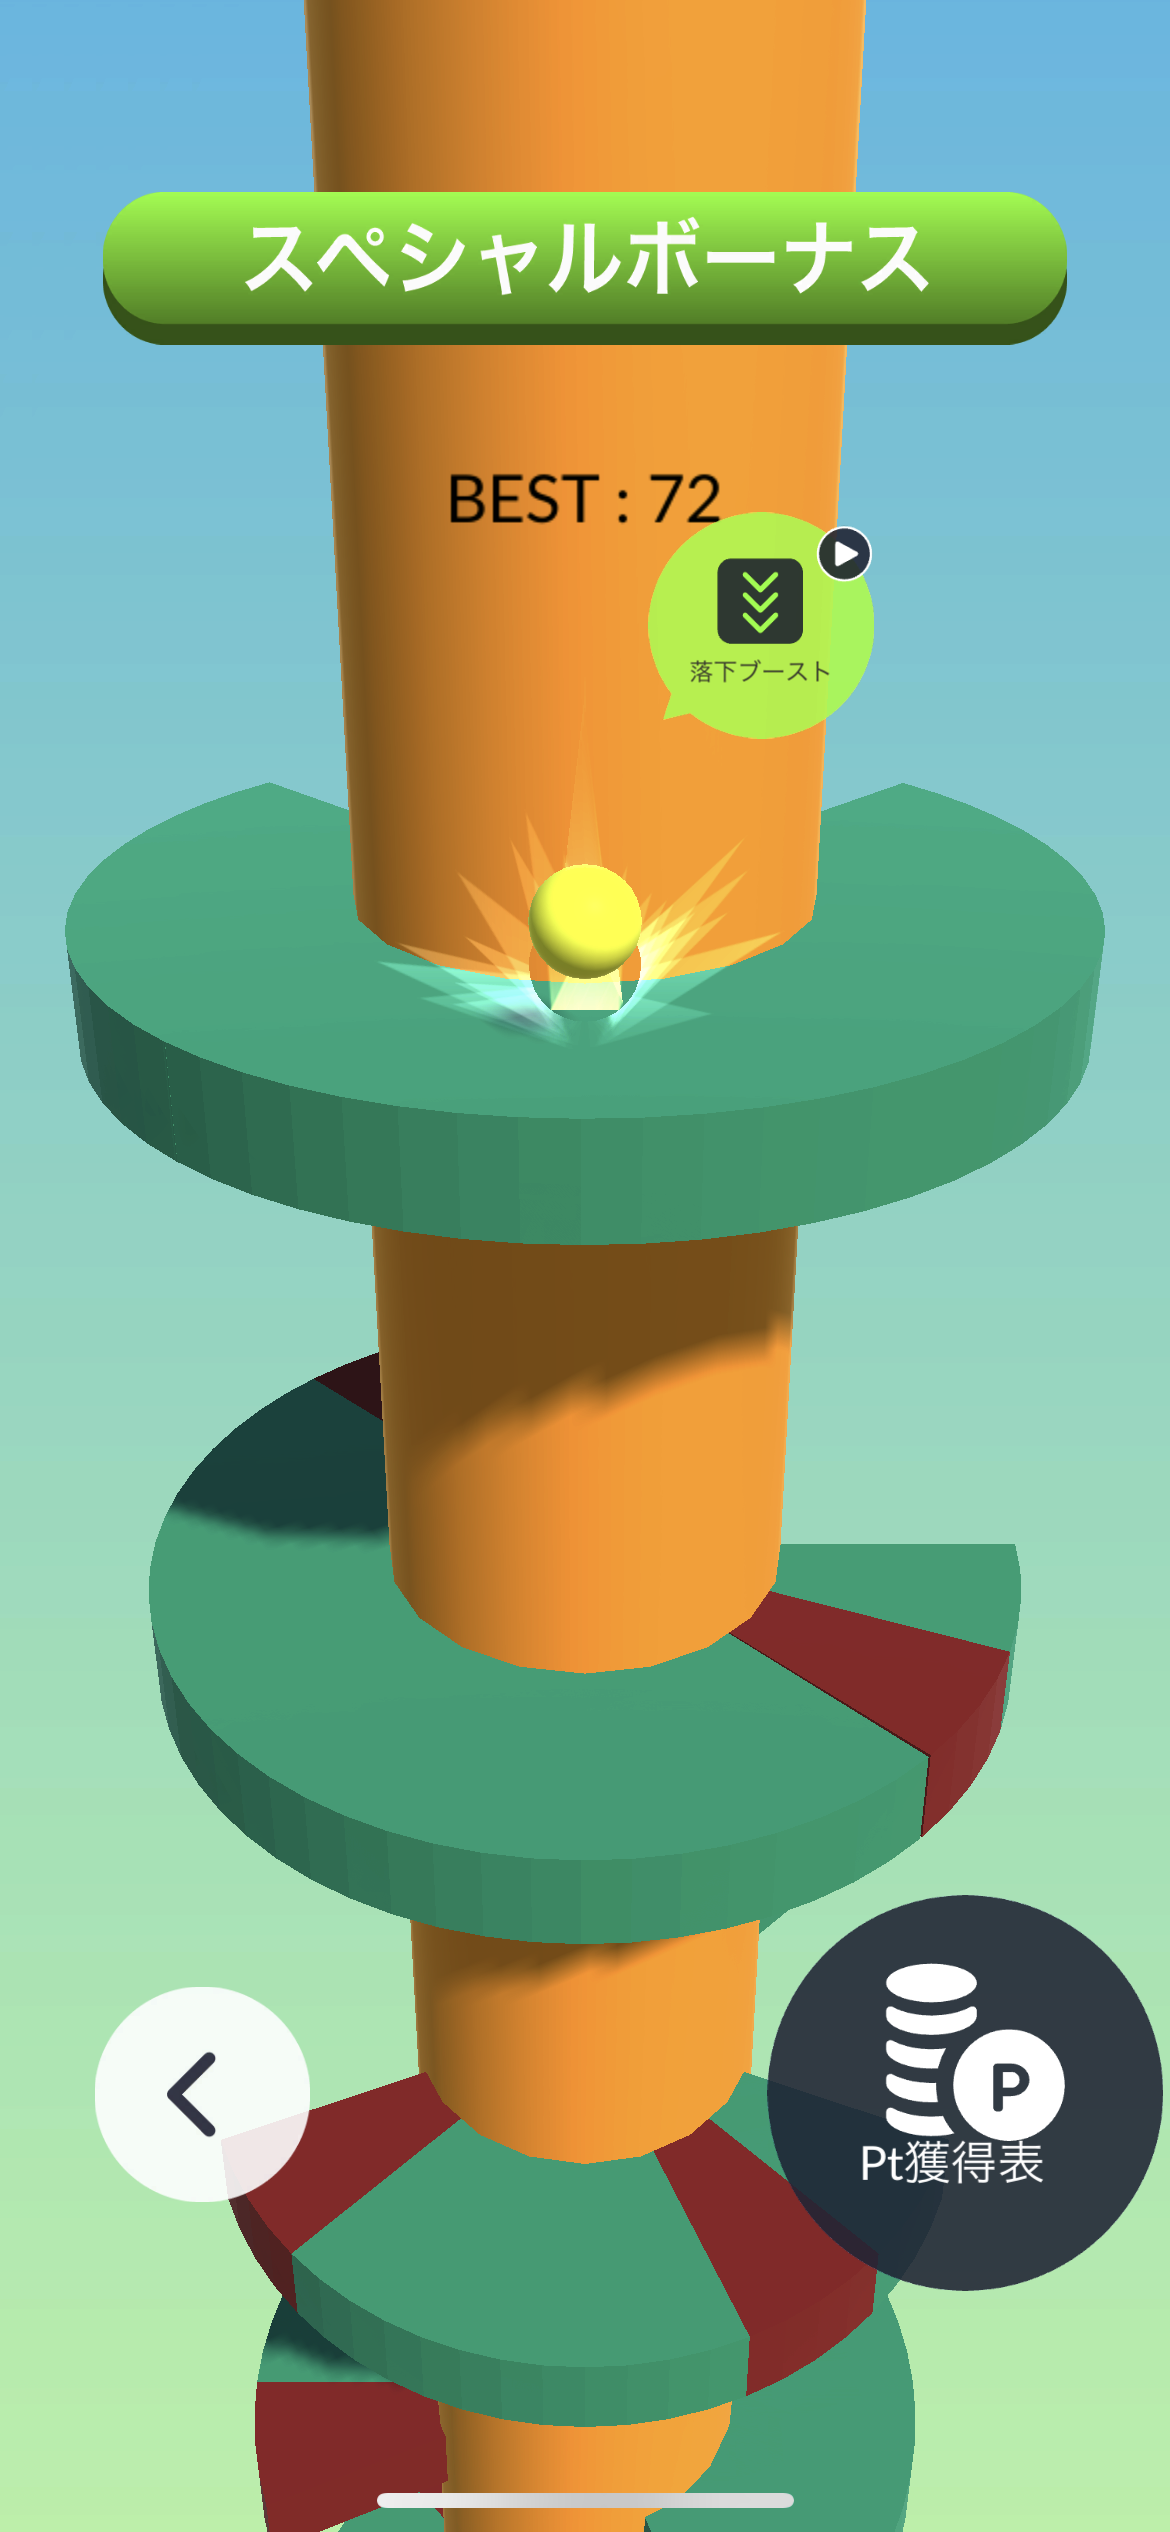 Helix Jump – Apps no Google Play